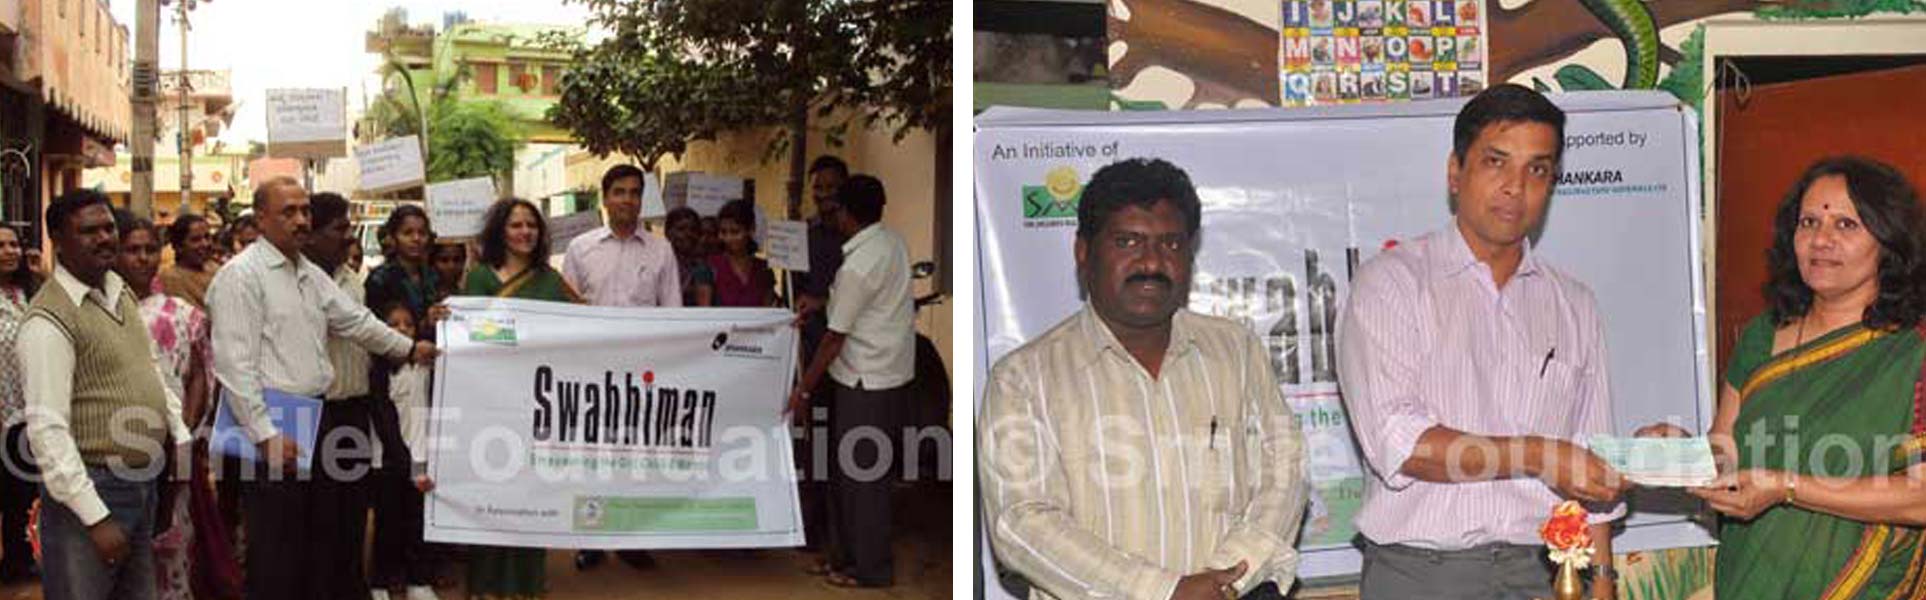 Swabhiman programme launched in Bangalore